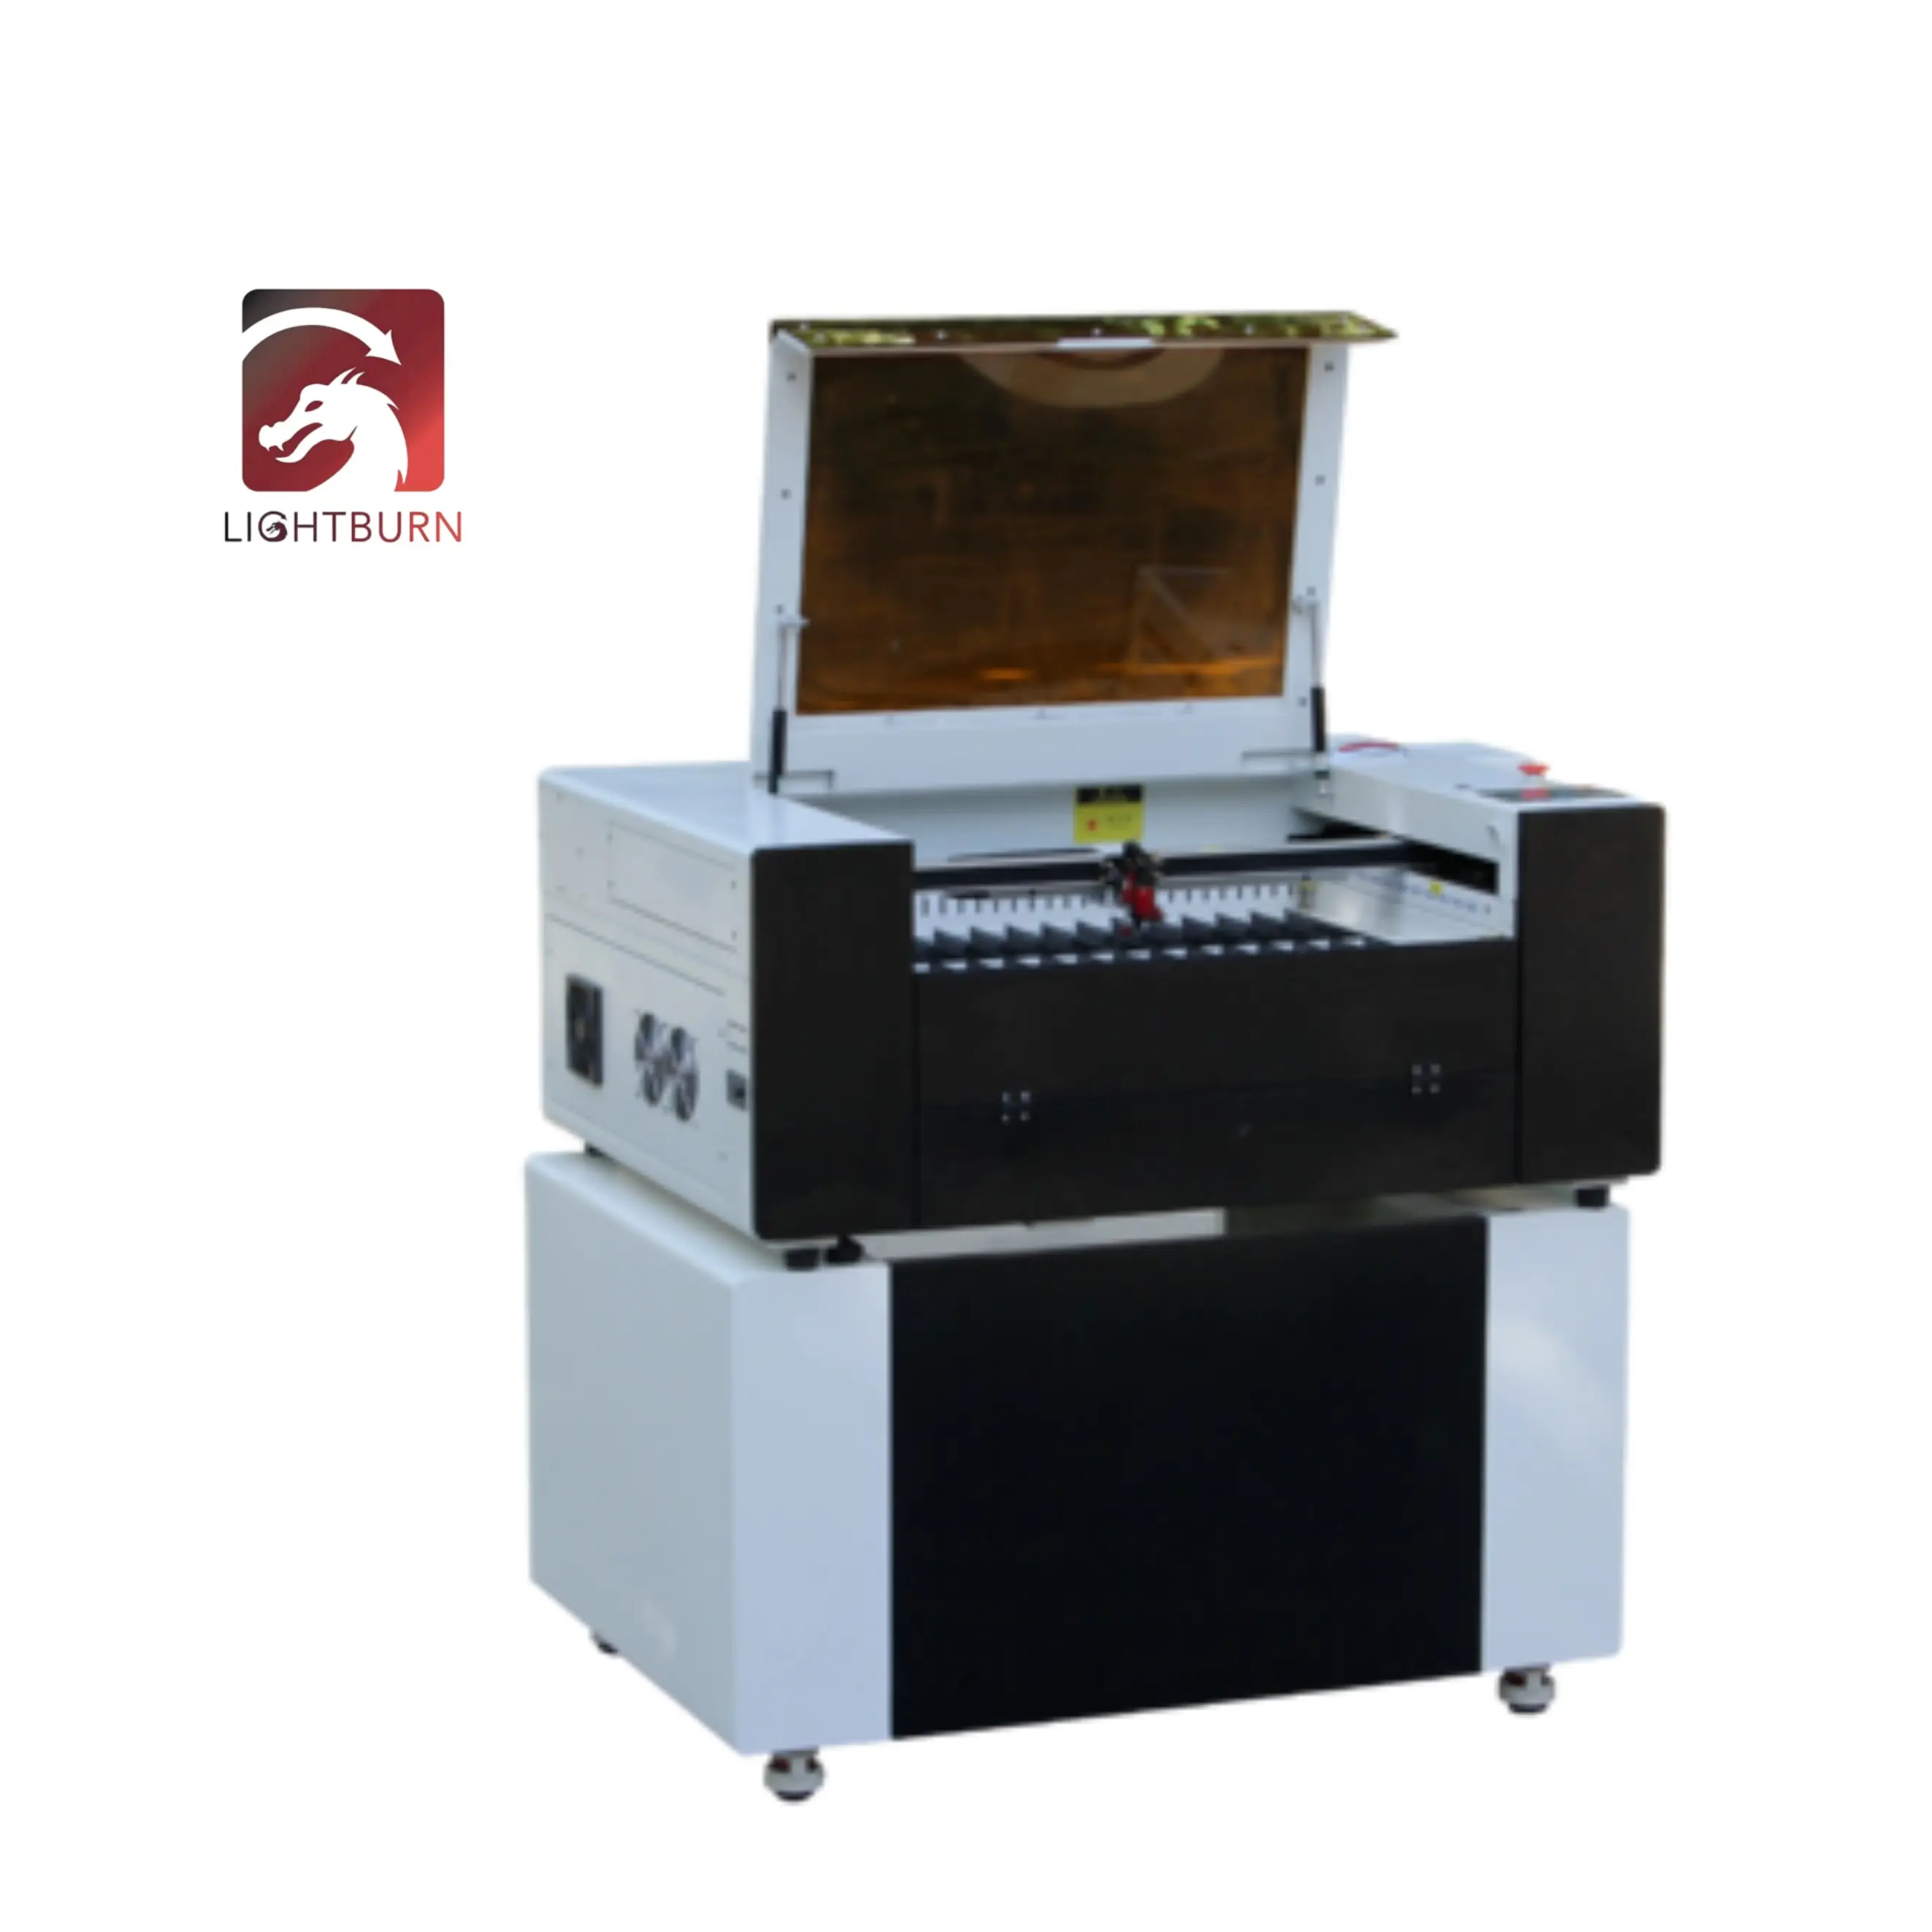 Desktop CO2 Laser Engraver Cutter With 50-120w User-friendly interface for easy operation